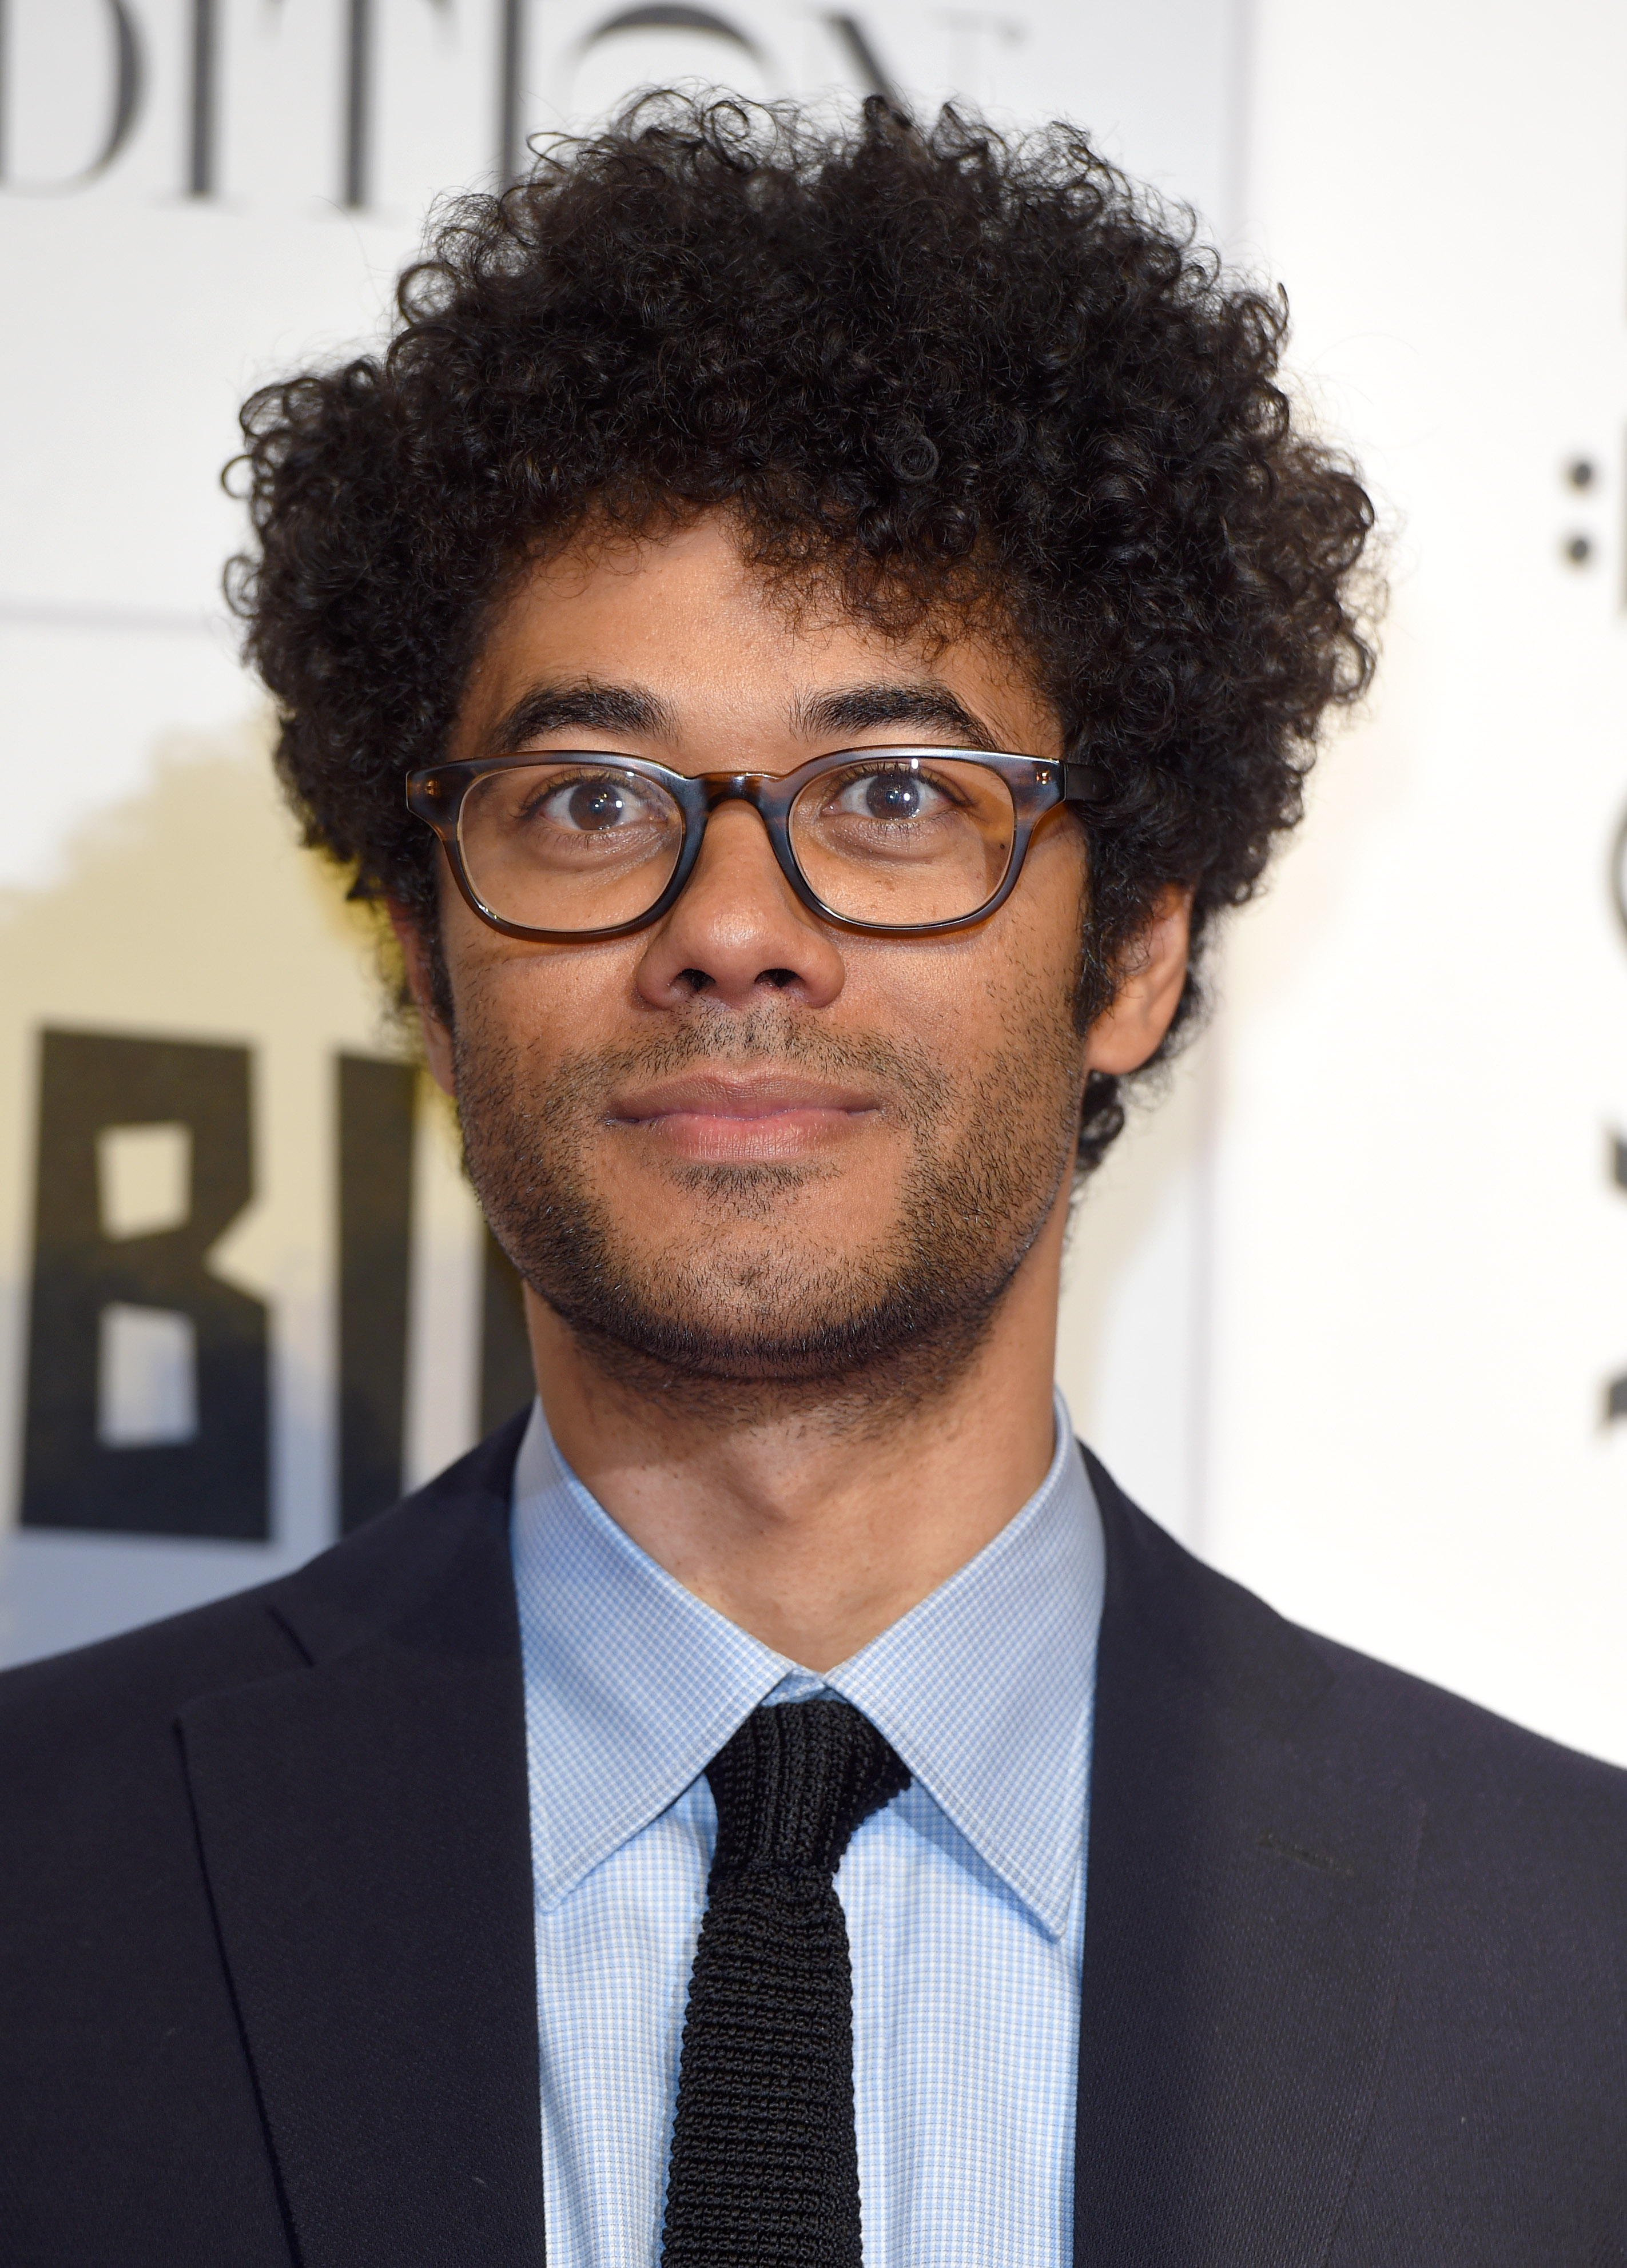 Richard Ayoade at the Moet British Independent Film Awards on December 6, 2015, in London, England. | Source: Getty Images